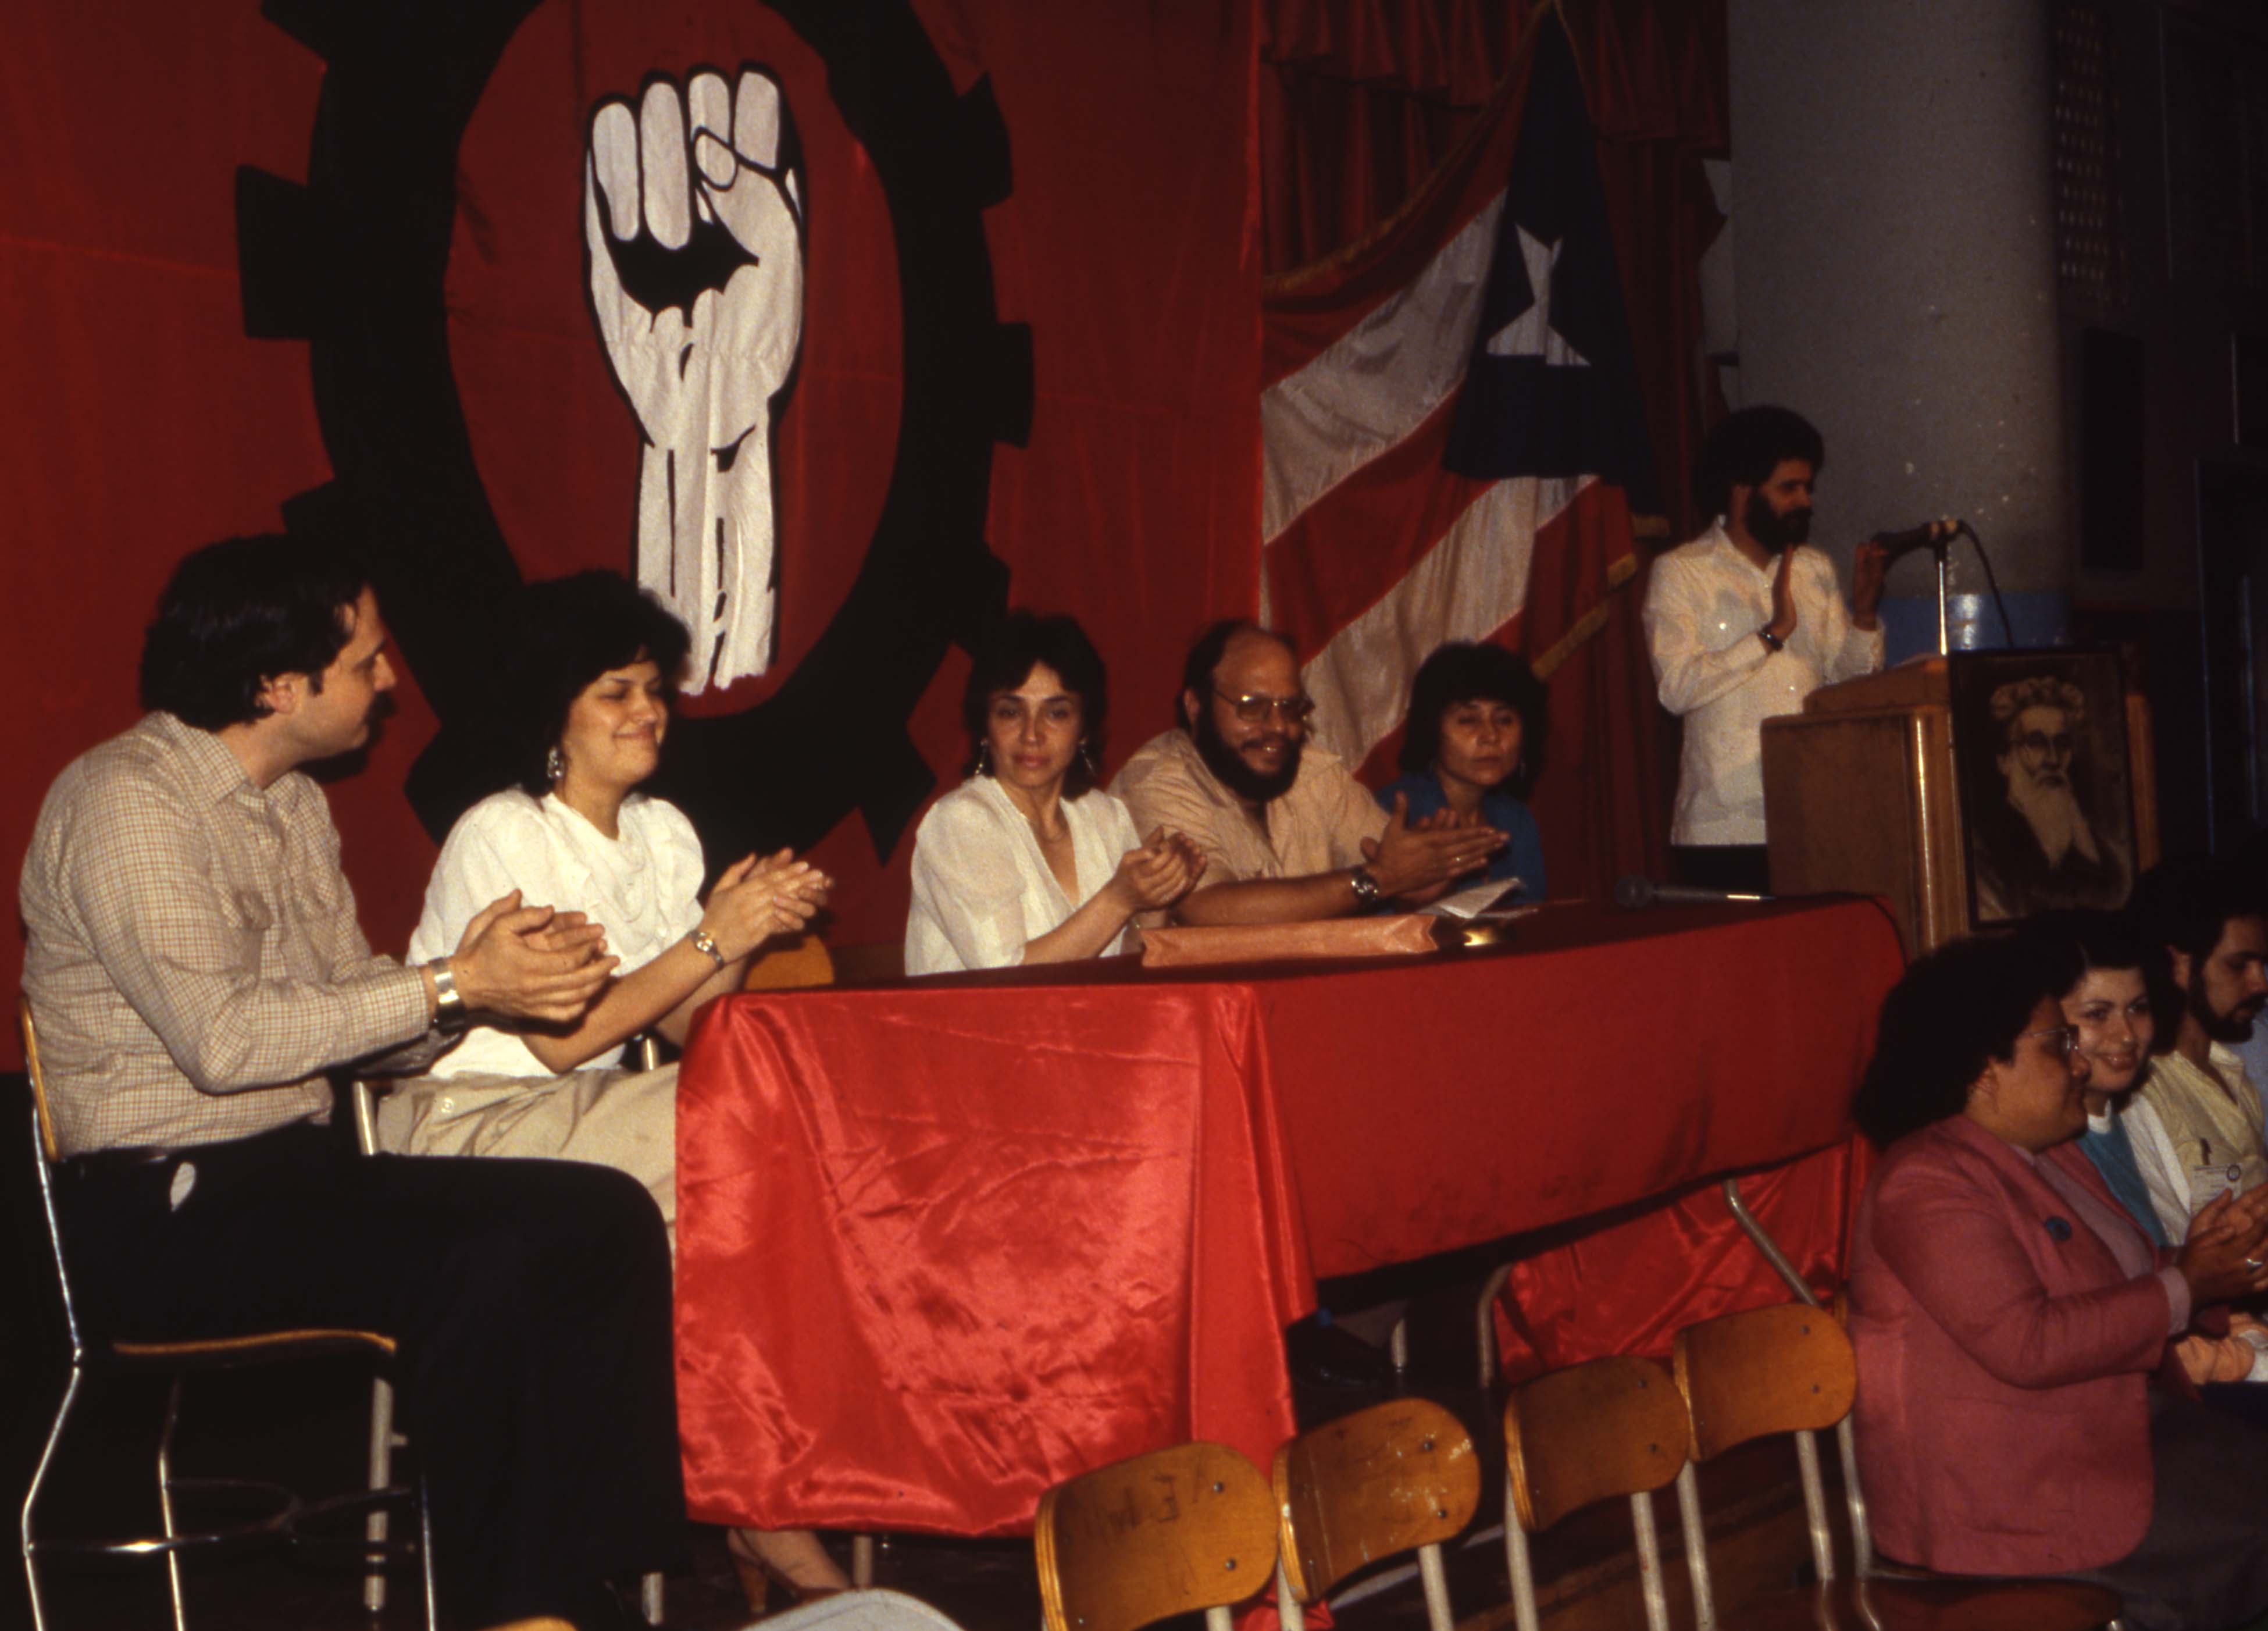 
An image of: José Soler, seated second from the right, at the 1983 Congress of the United States section of the Partido Socialista Puertorriqueño (PSP).